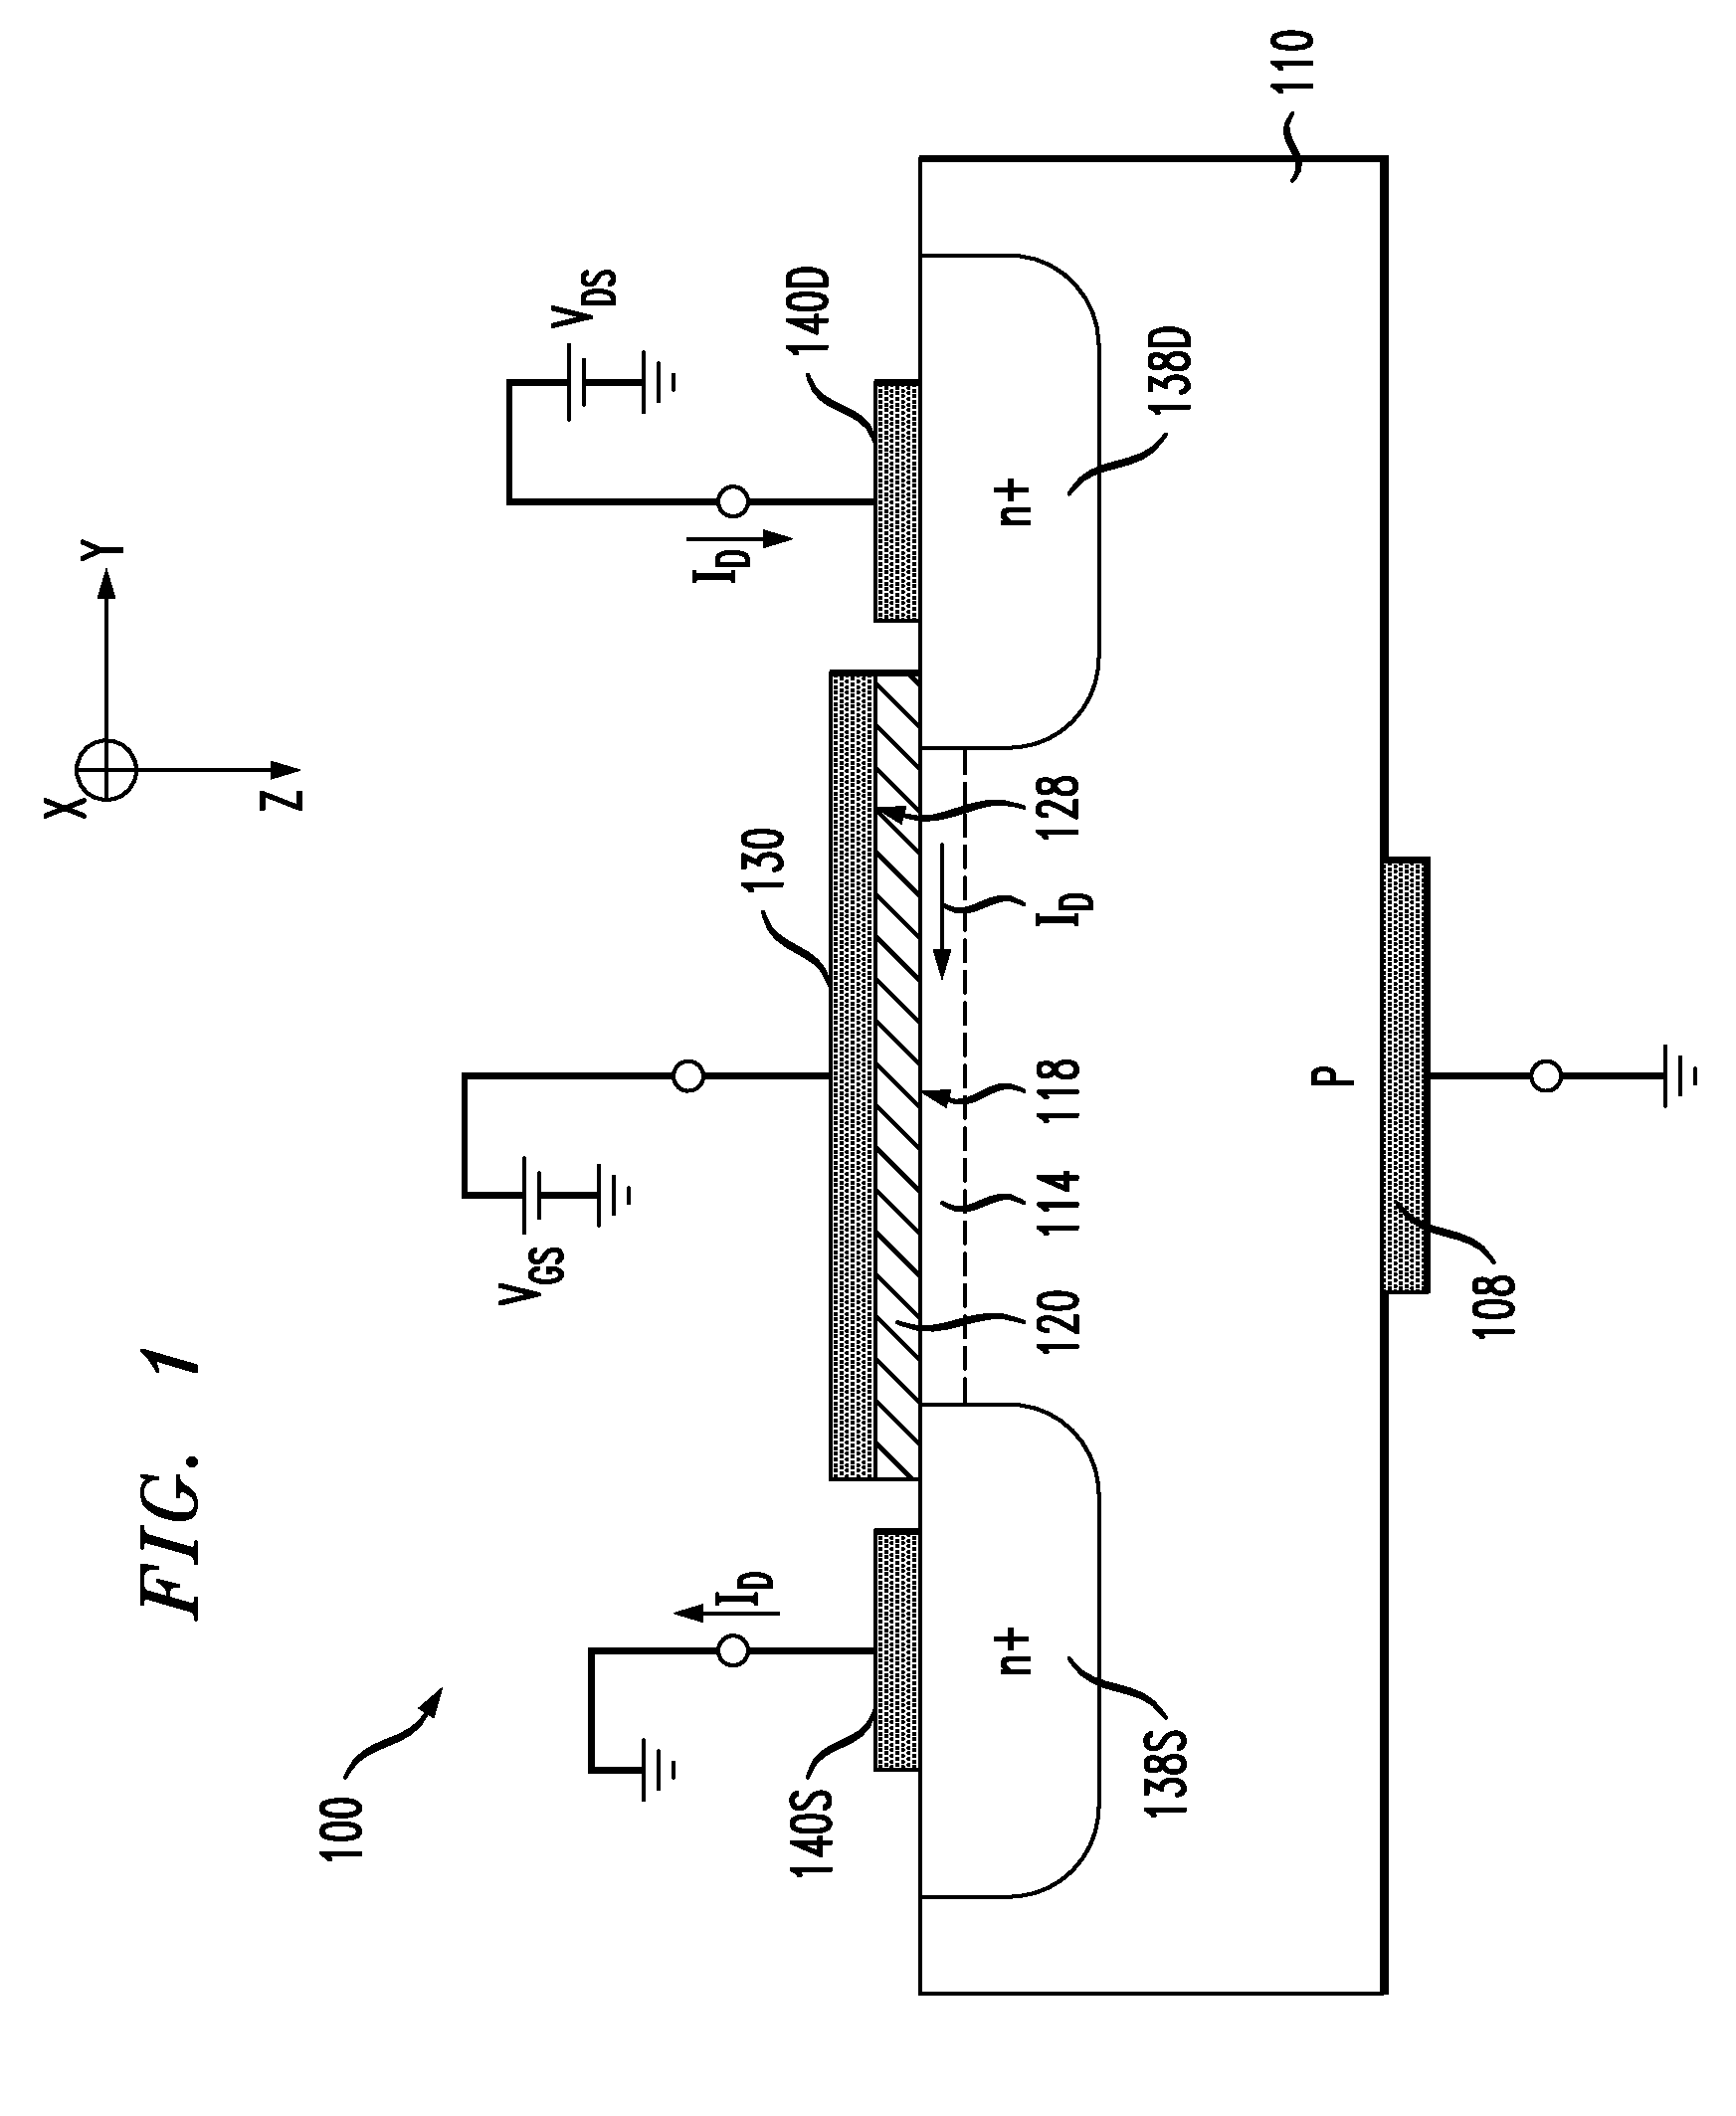 Surface-plasmon detector based on a field-effect transistor